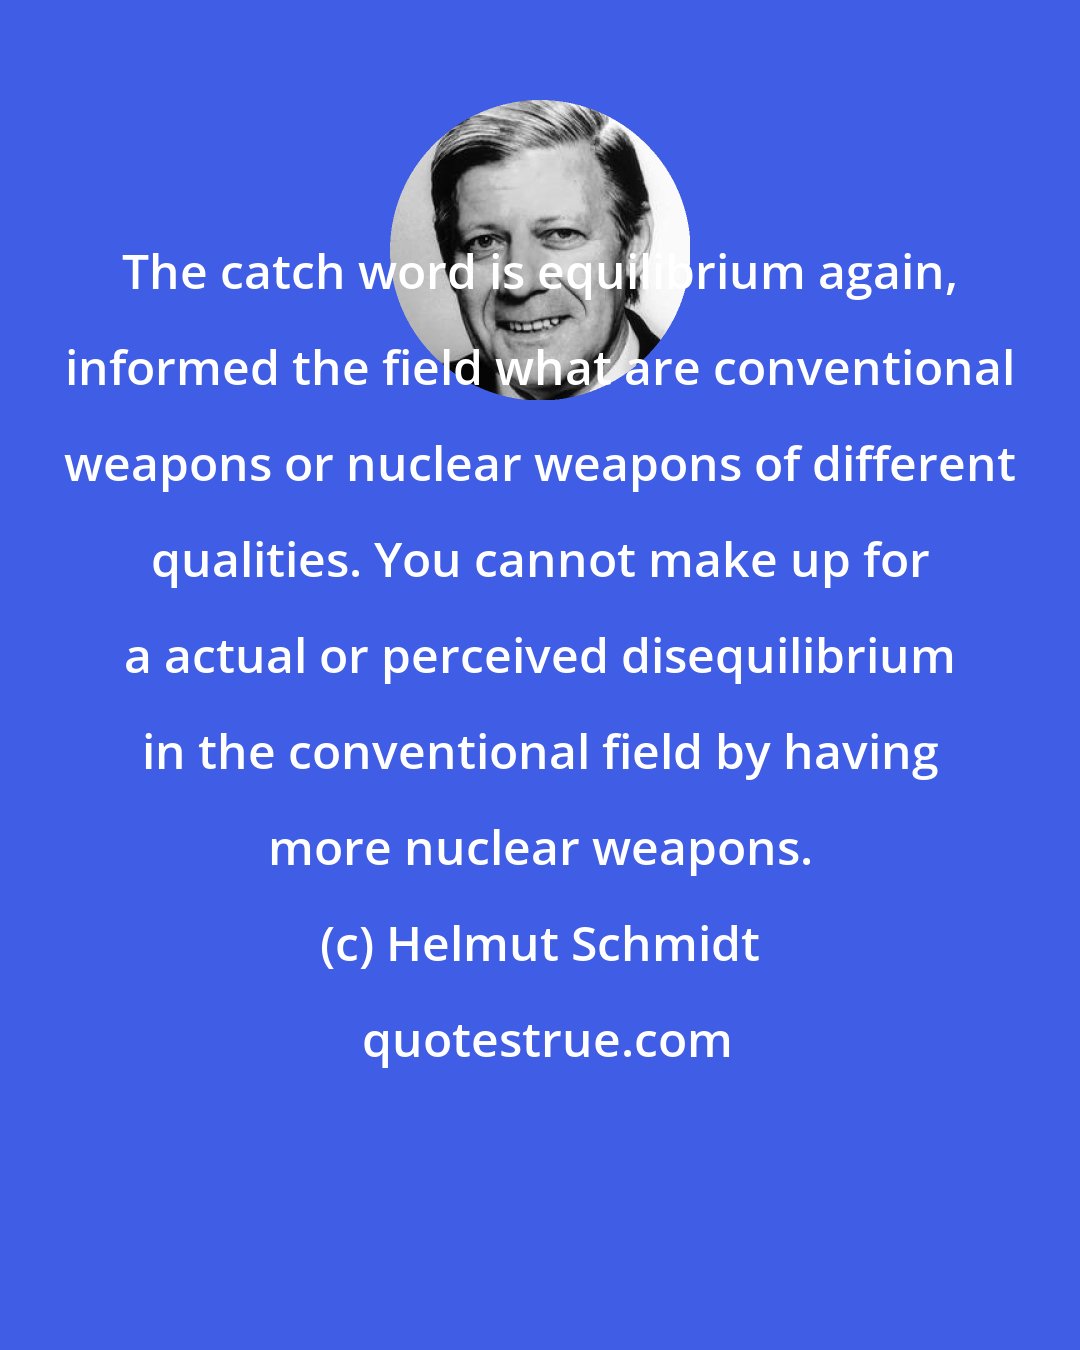 Helmut Schmidt: The catch word is equilibrium again, informed the field what are conventional weapons or nuclear weapons of different qualities. You cannot make up for a actual or perceived disequilibrium in the conventional field by having more nuclear weapons.